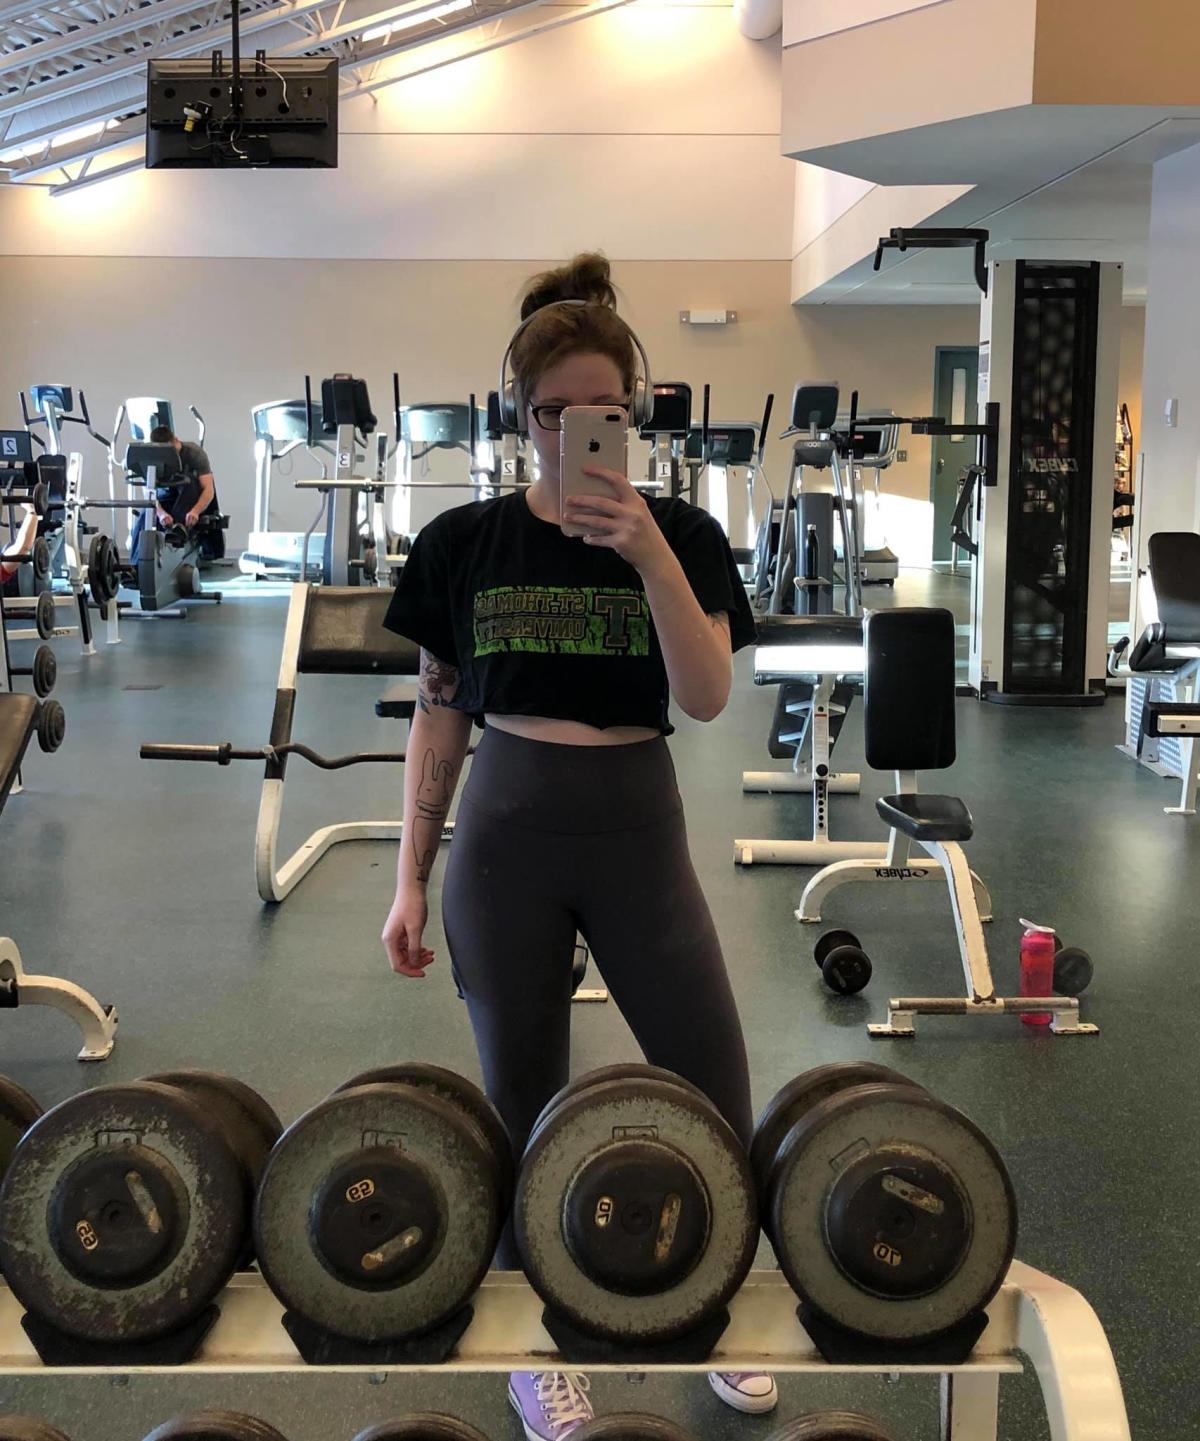 I got dress coded at the gym for a normal workout outfit - people are  stunned it can even happen